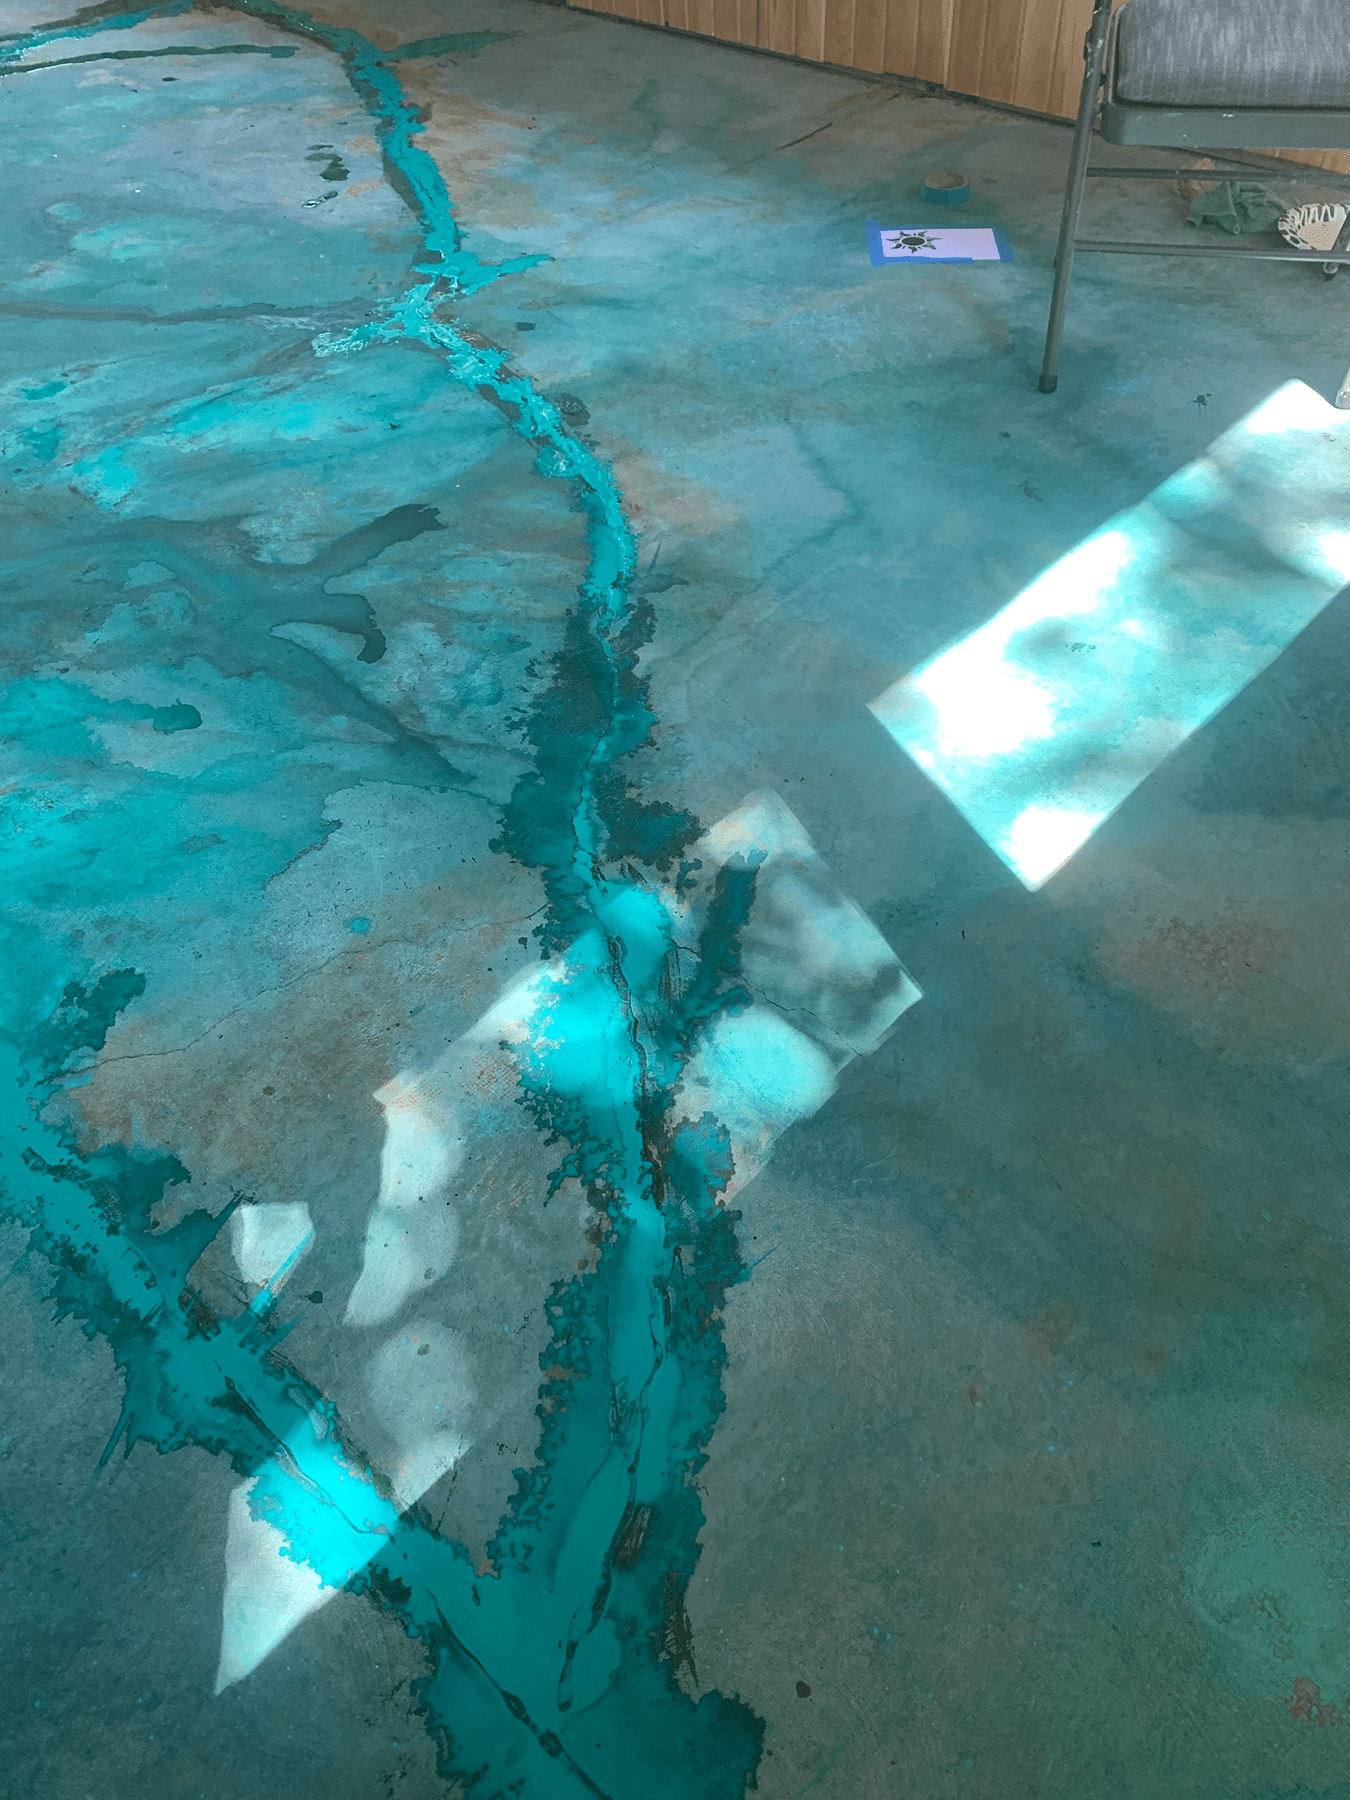 Close-up view of a major crack in the porch floor, artfully integrated into the design using blue and black acrylics and later filled with epoxy